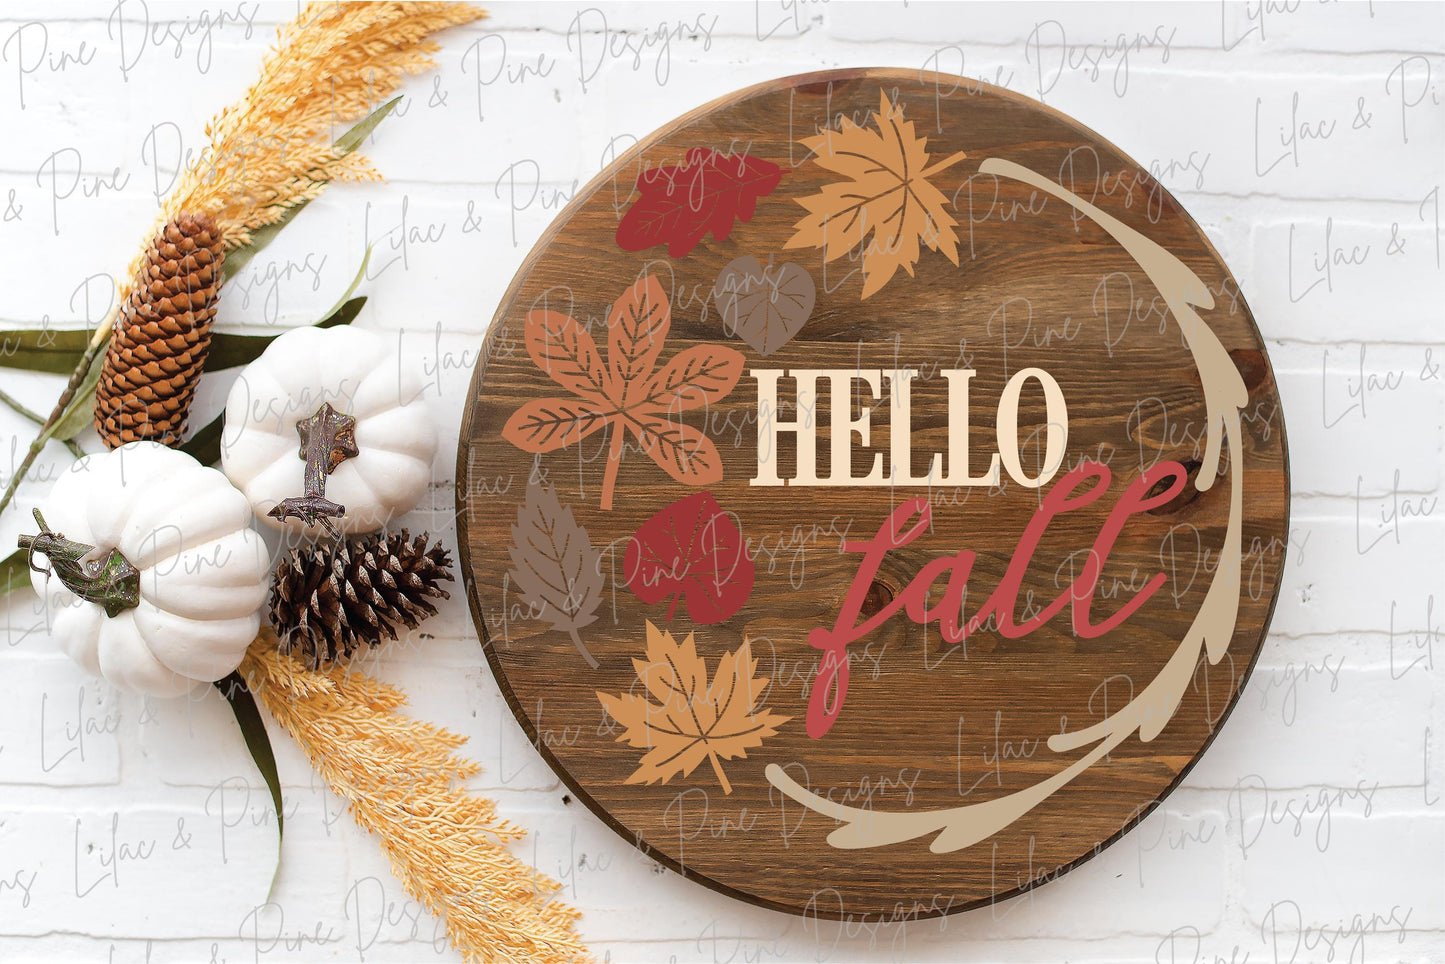 Hello Fall door hanger SVG, Fall welcome sign SVG, fall leaves round door hanger, Fall porch decor, Fall round sign svg, Glowforge laser SVG